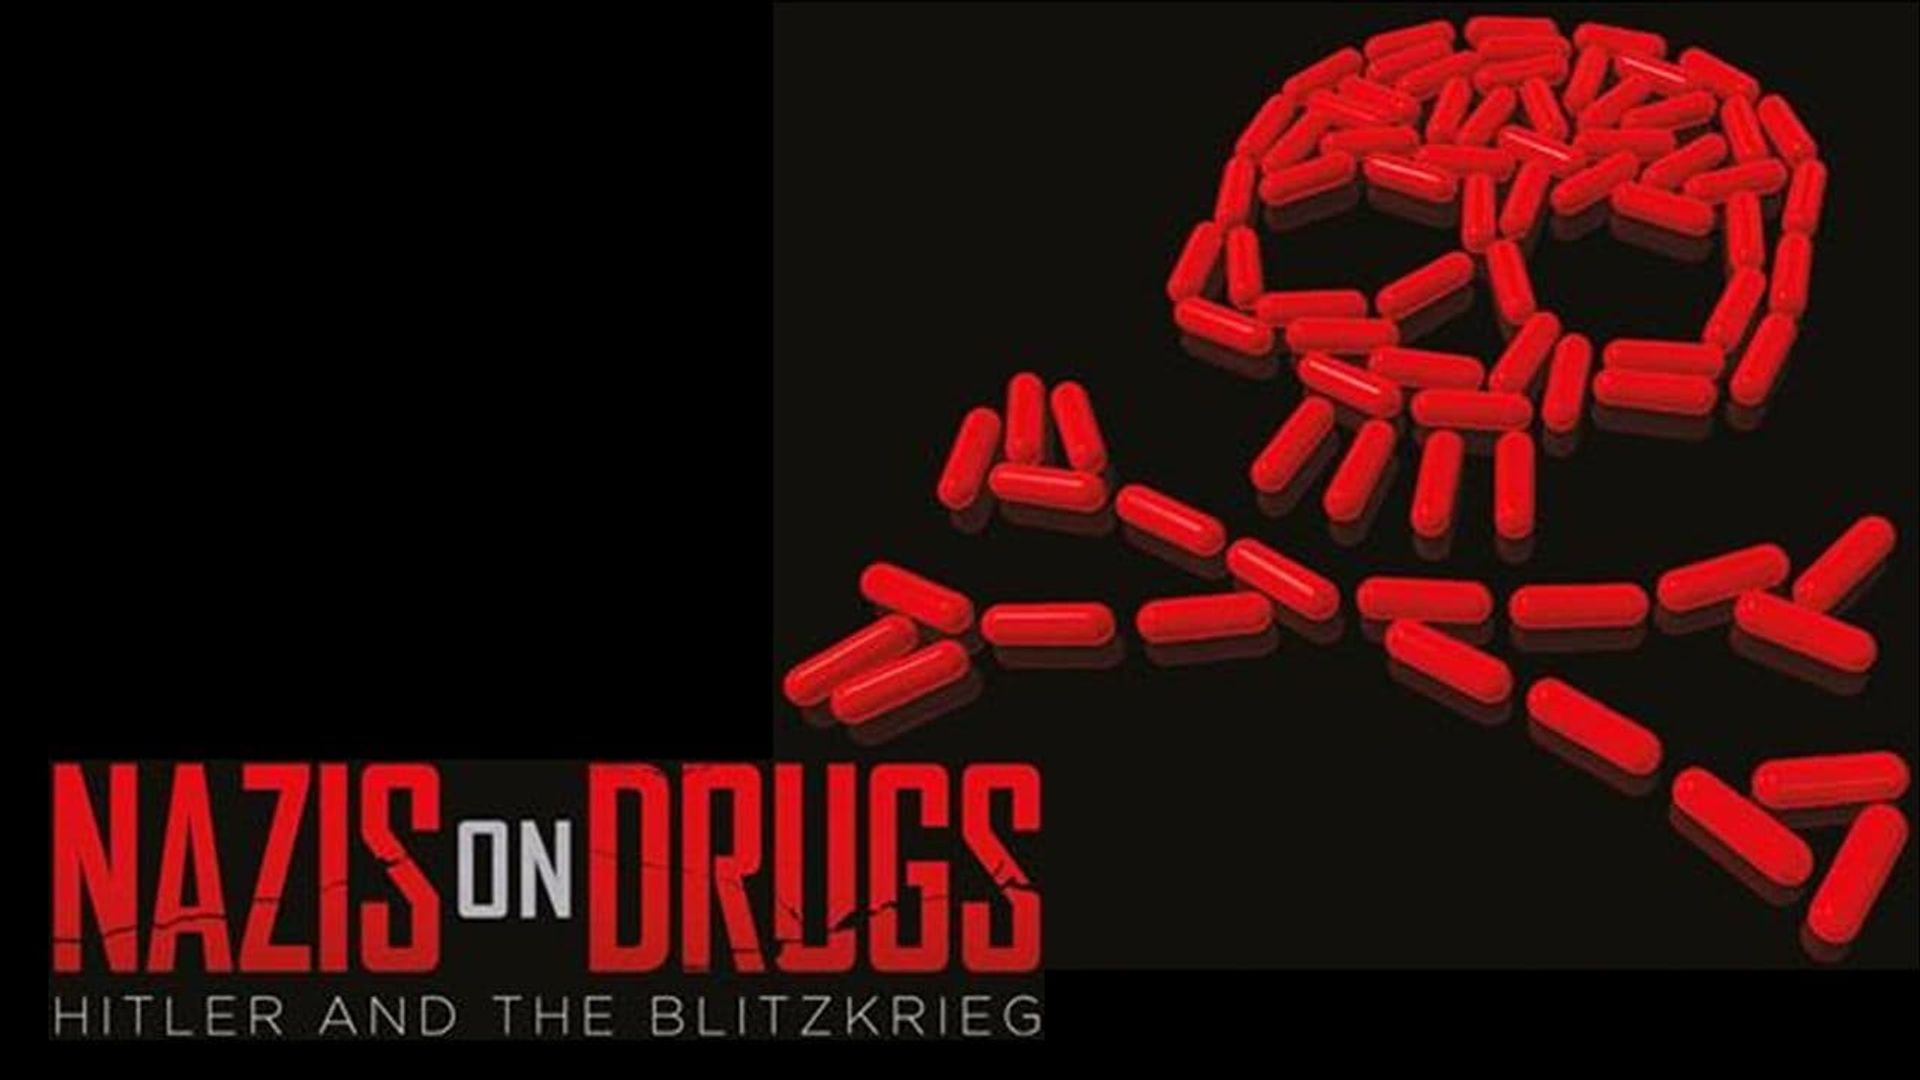 Nazis on Drugs: Hitler and the Blitzkrieg background